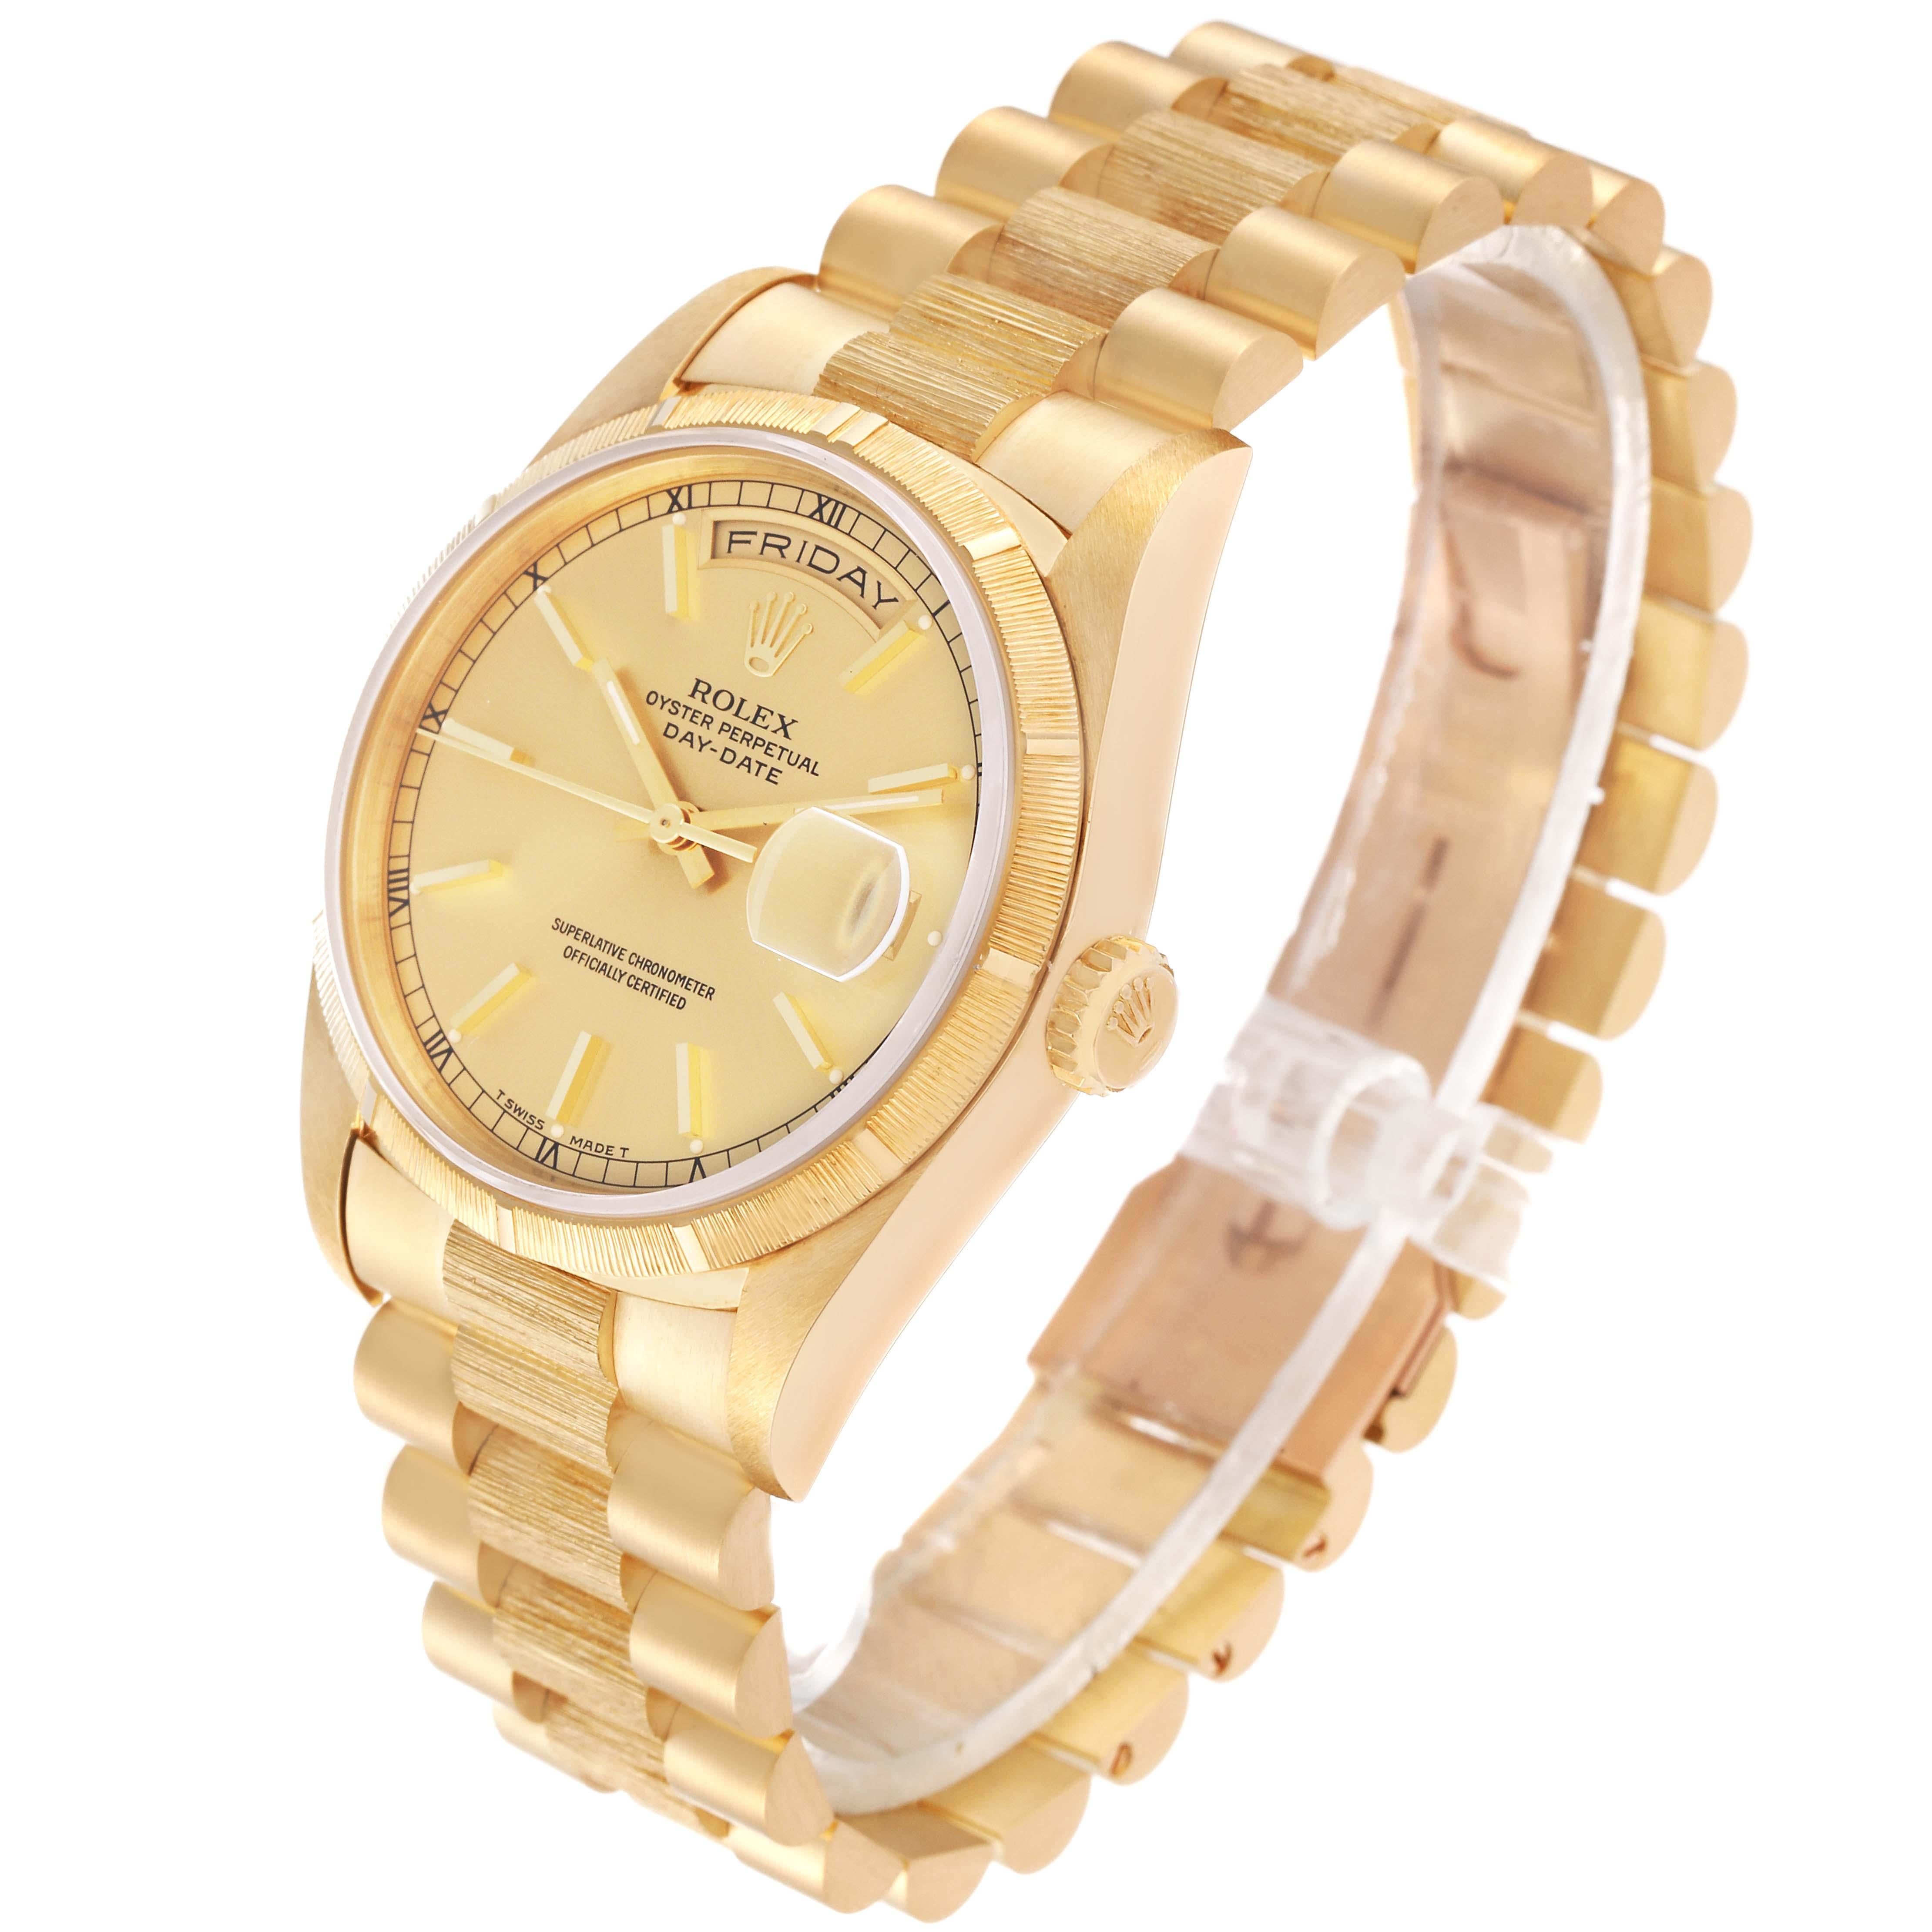 Rolex Day-Date President Yellow Gold Bark Finish Mens Watch 18248 For Sale 1